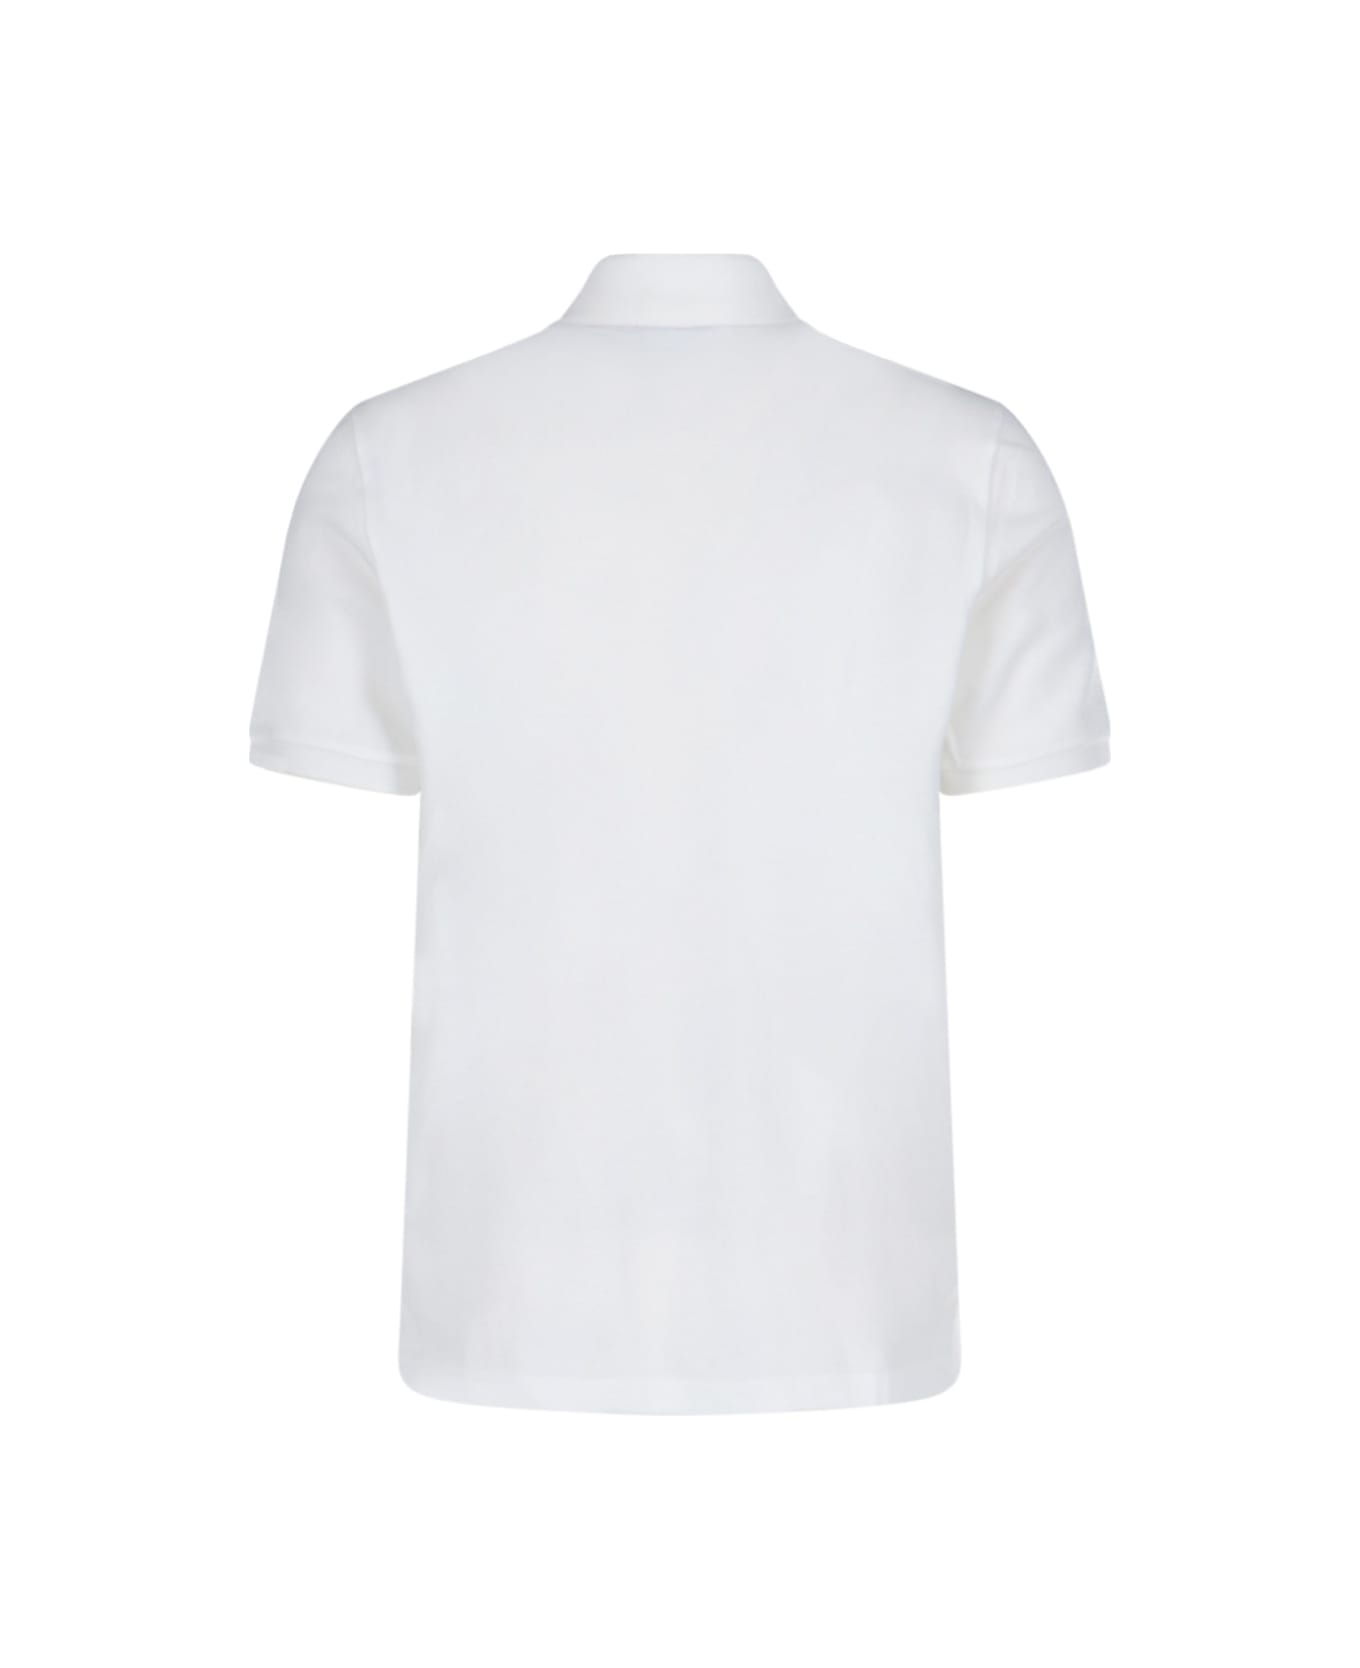 Polo Ralph Lauren Embroidered Polo Shirt - Classic Oxford White